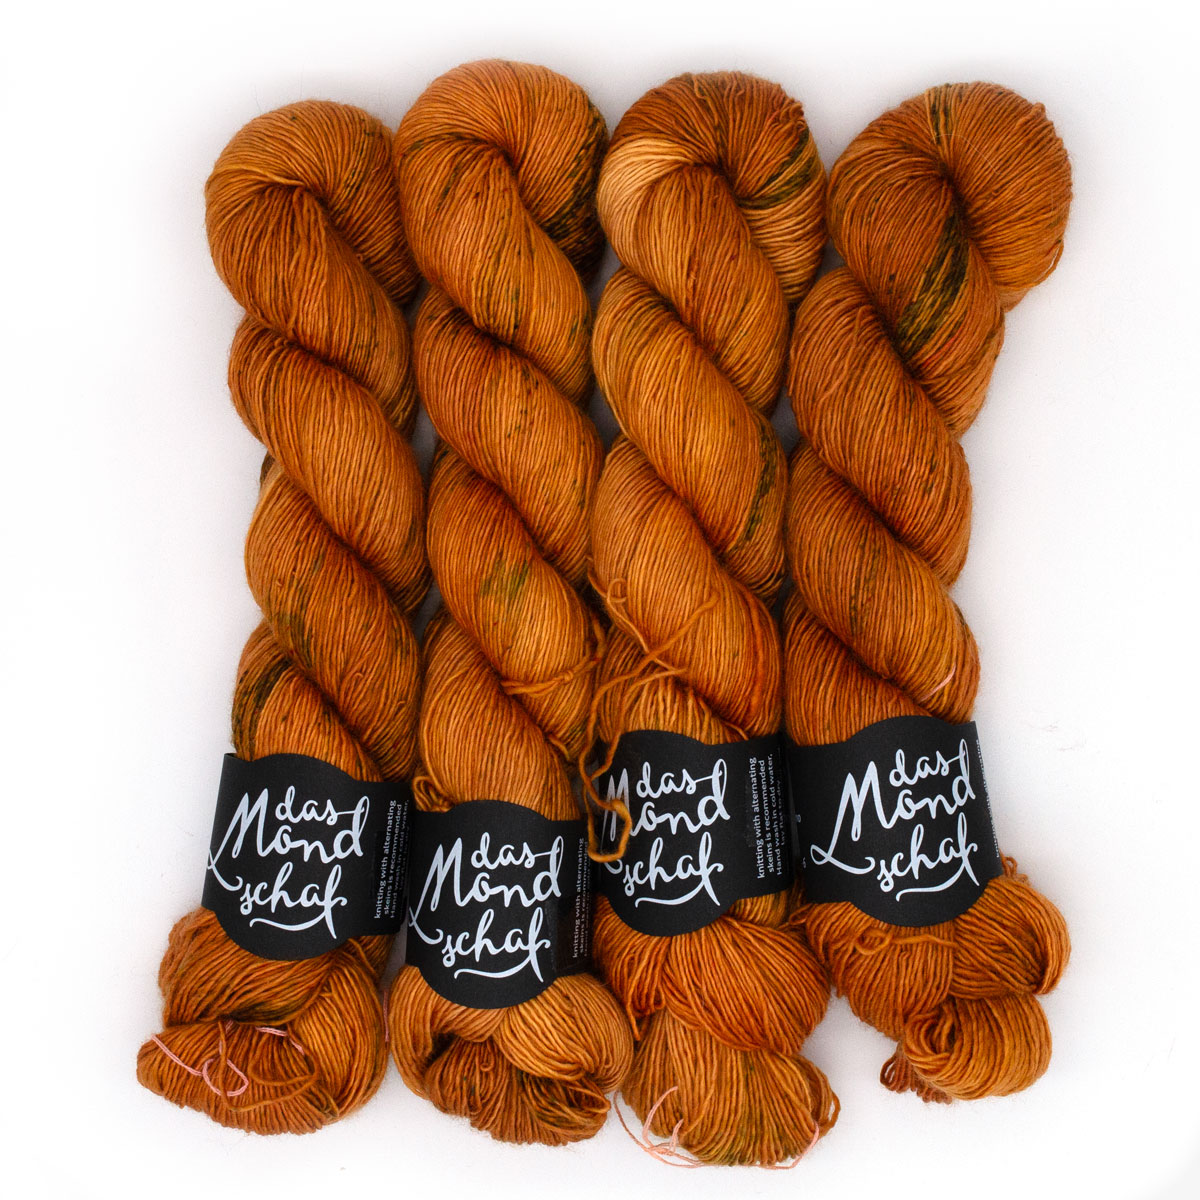 TRUTH OR CONSEQUENCES - 100g Merino Singles